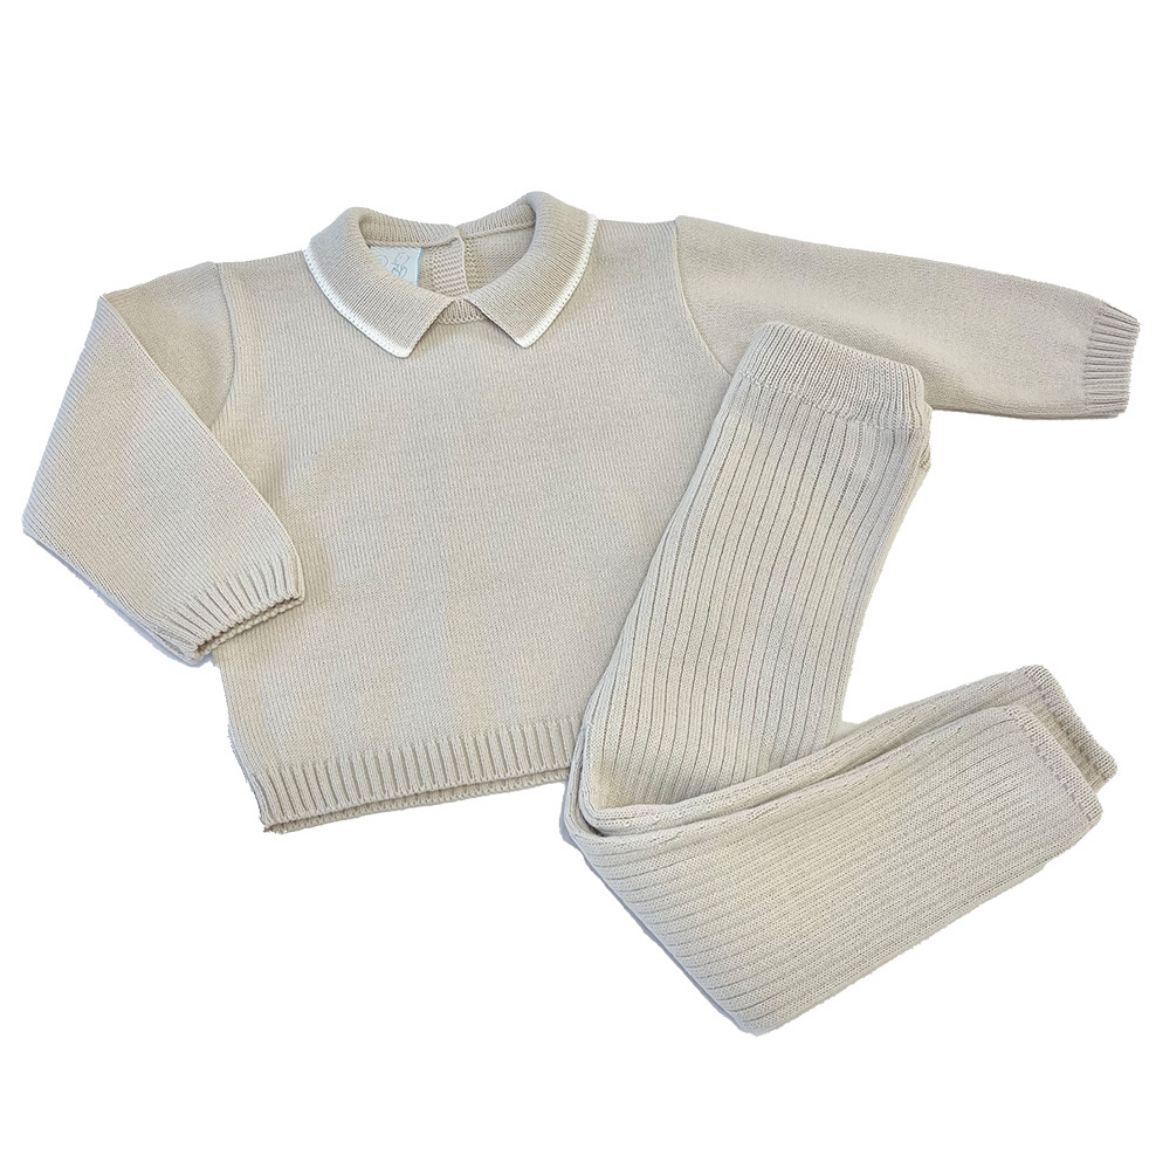 Picture of Granlei Boys Beige Knitted Set